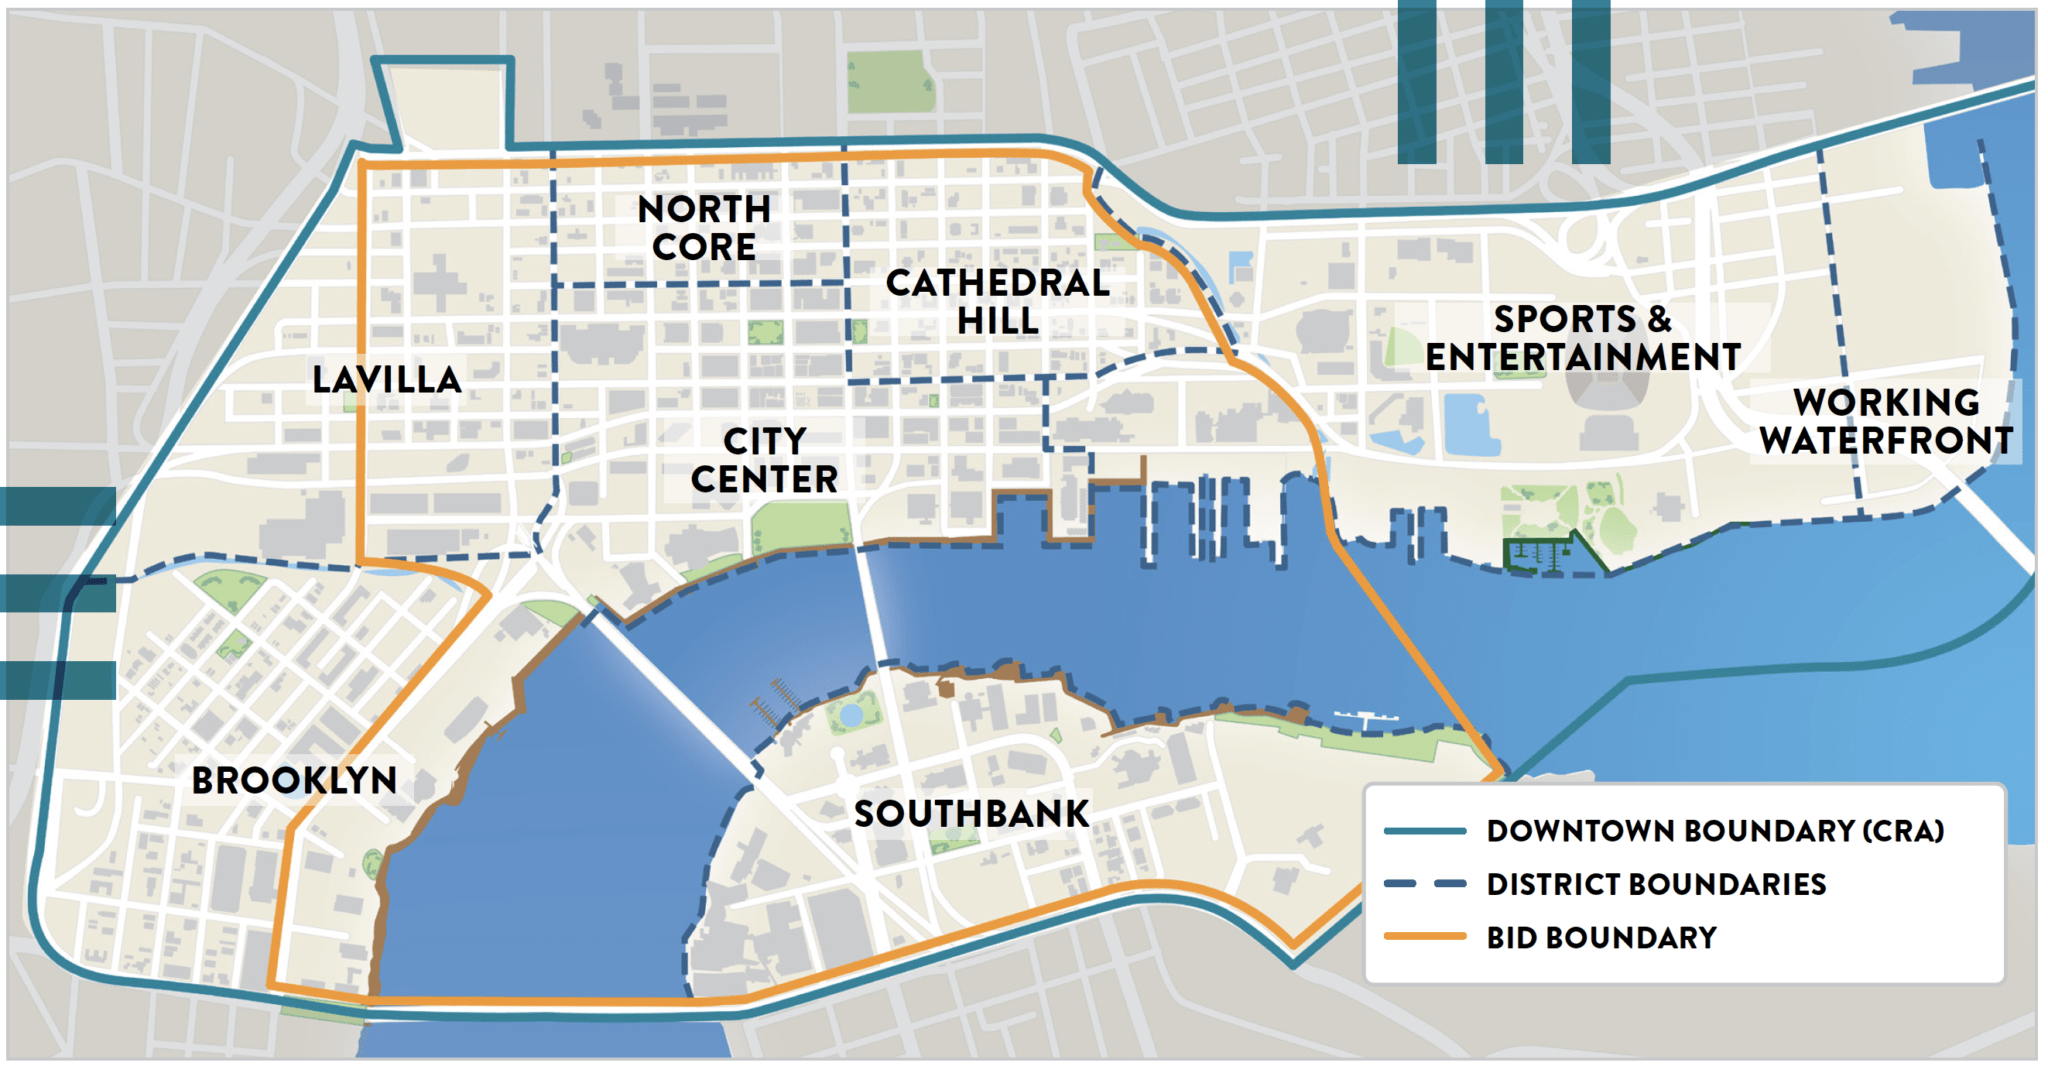 Downtown CRA and Downtown Vision Boundaries